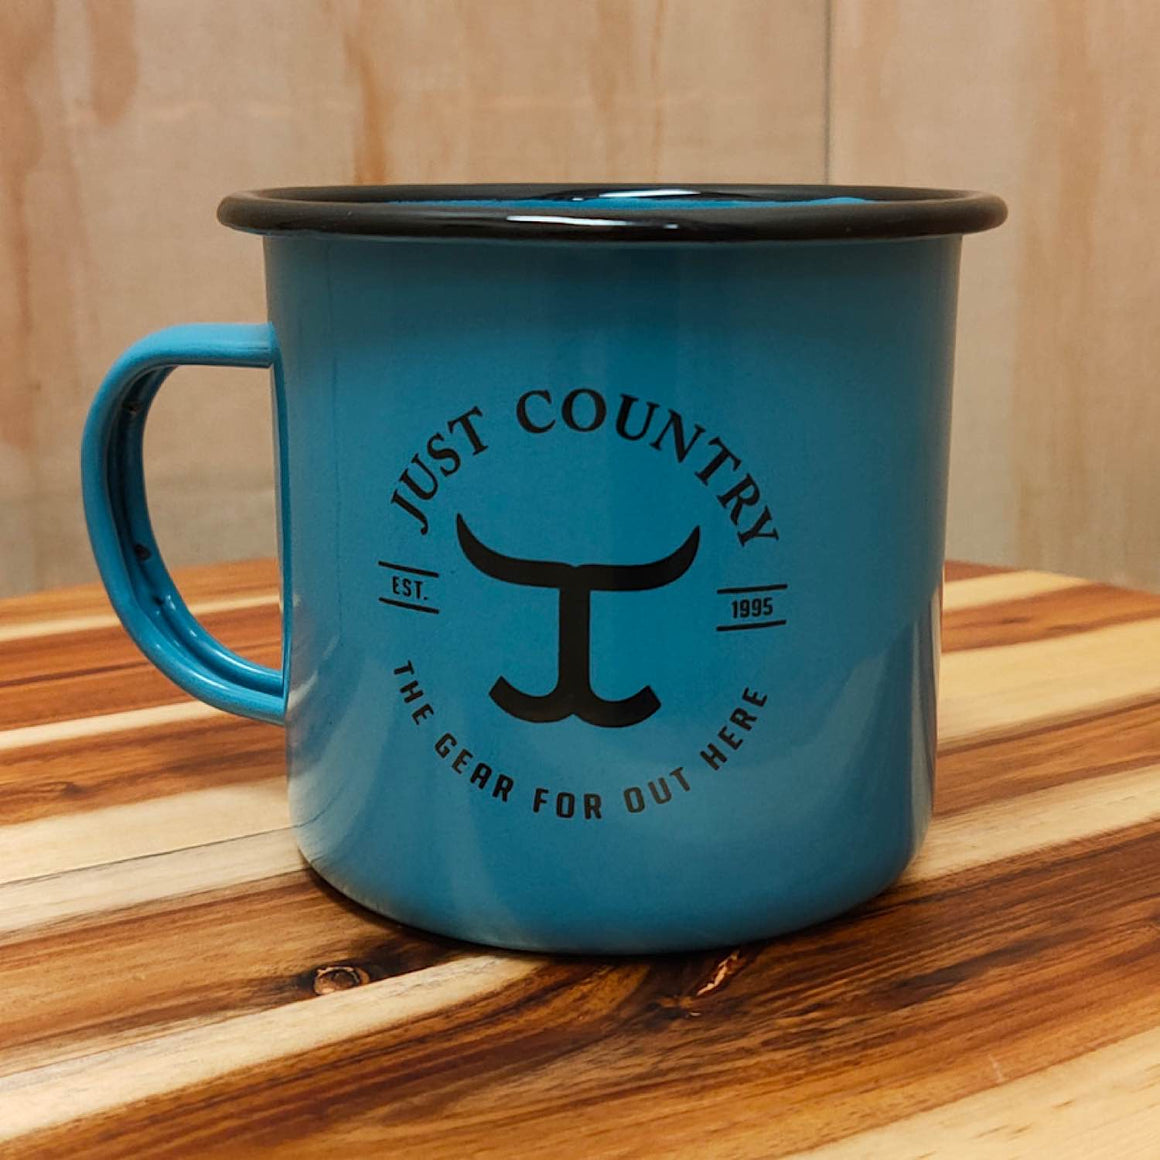 Just Country Pannikin Cup Blue